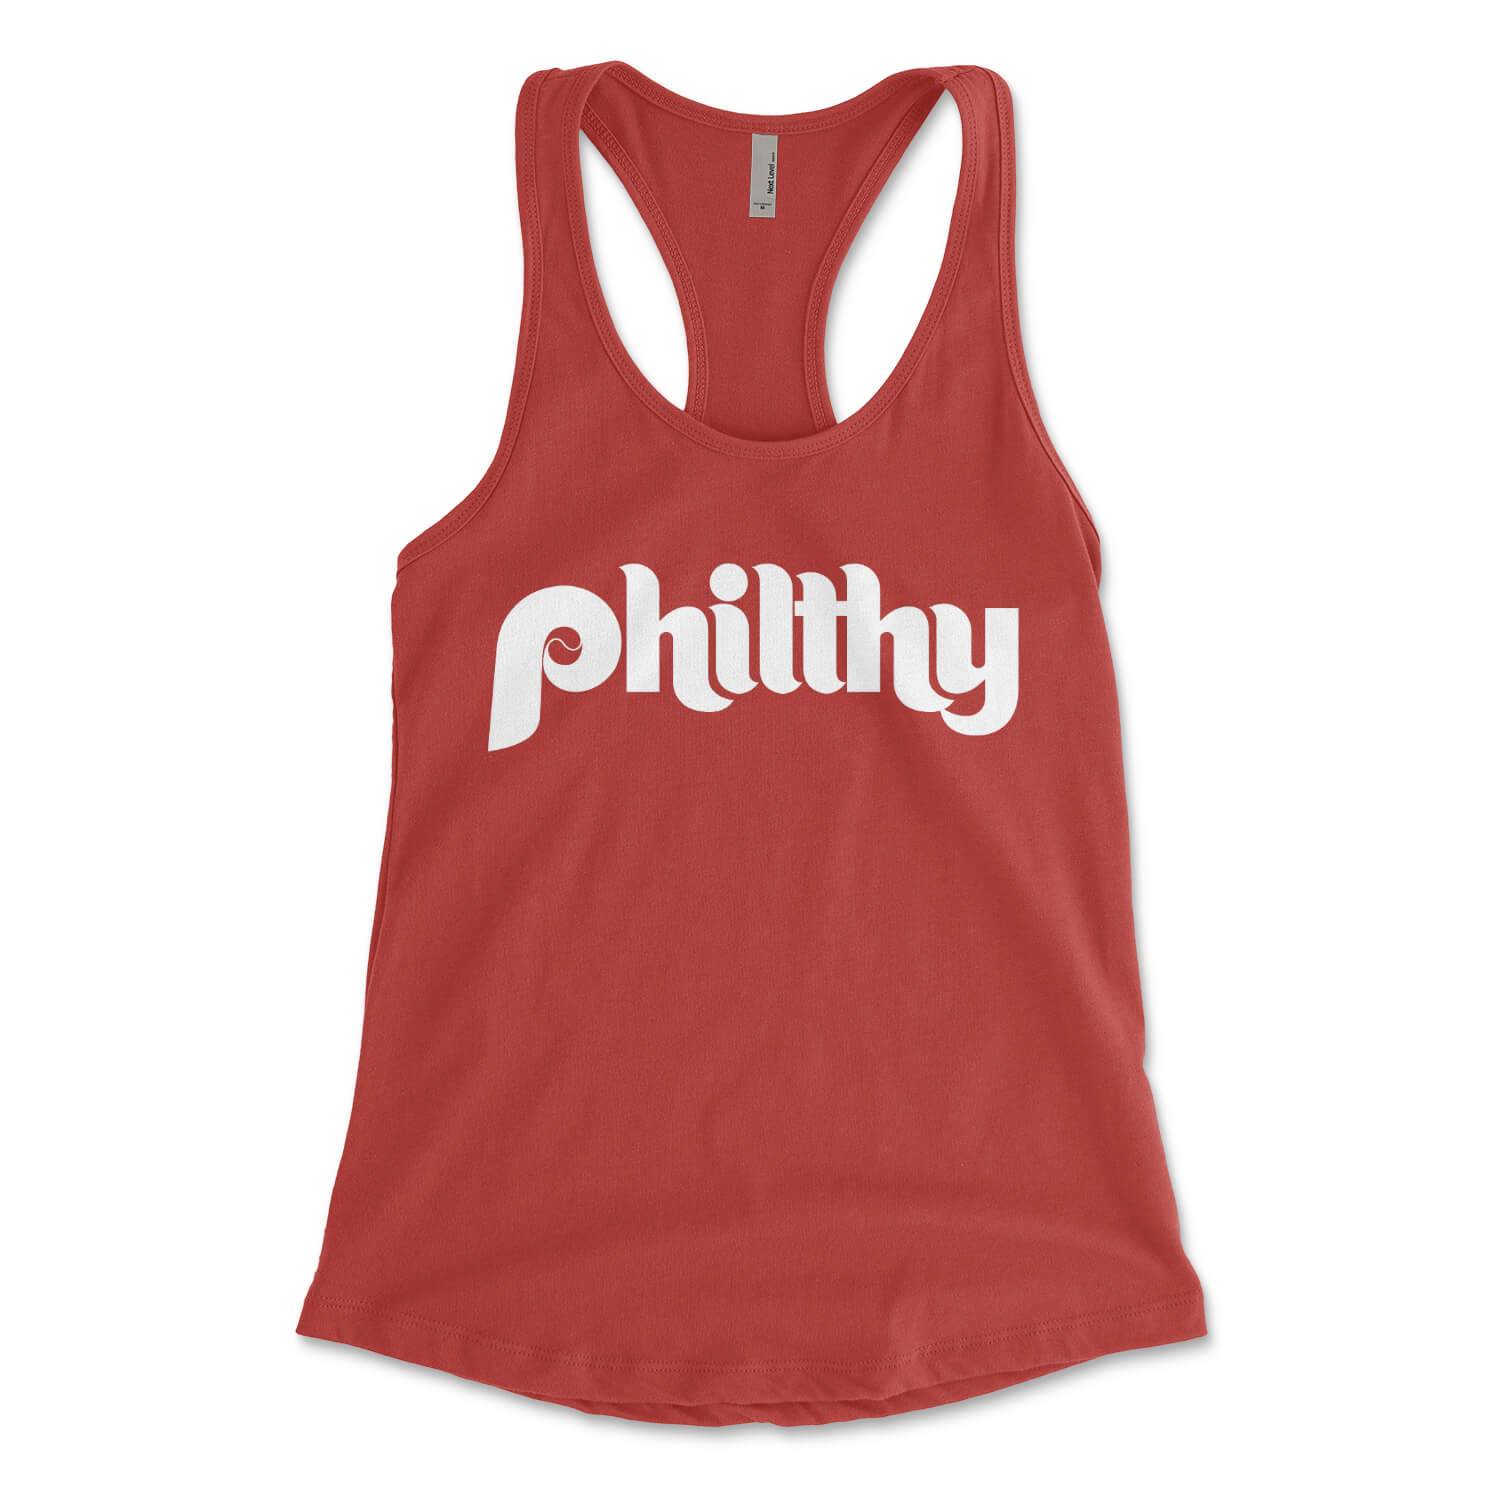 Philadelphia Phillies Philthy red womens racerback tank top from Phillygoat 